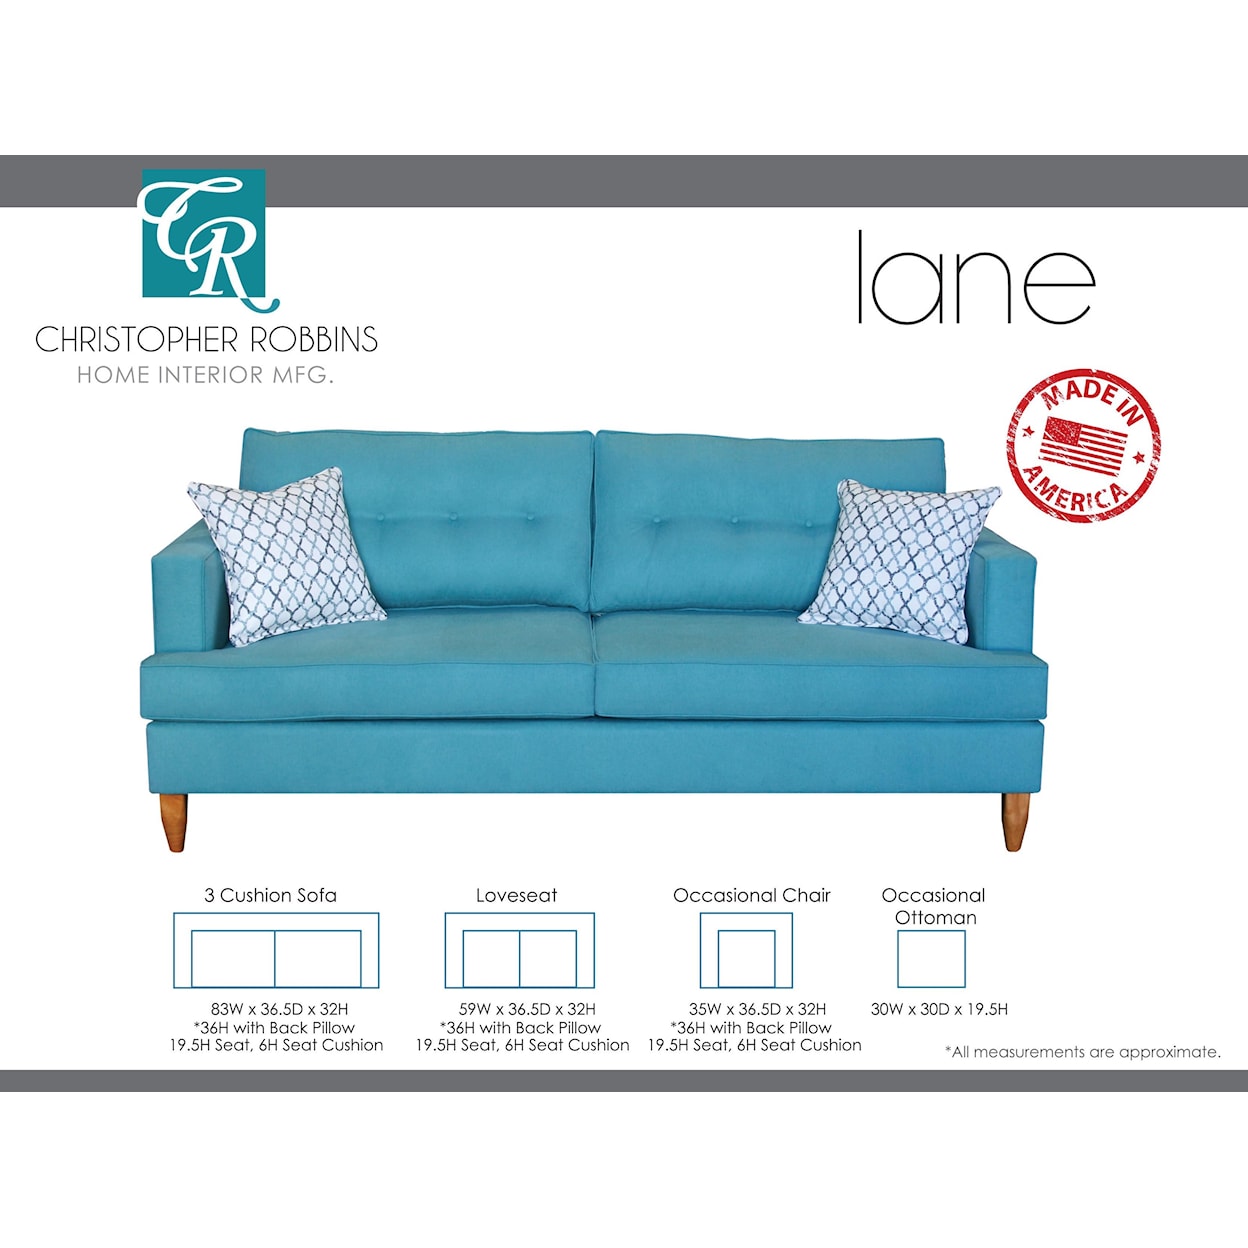 Sussex Upholstery Co. Lane 2 Cushion Sofa